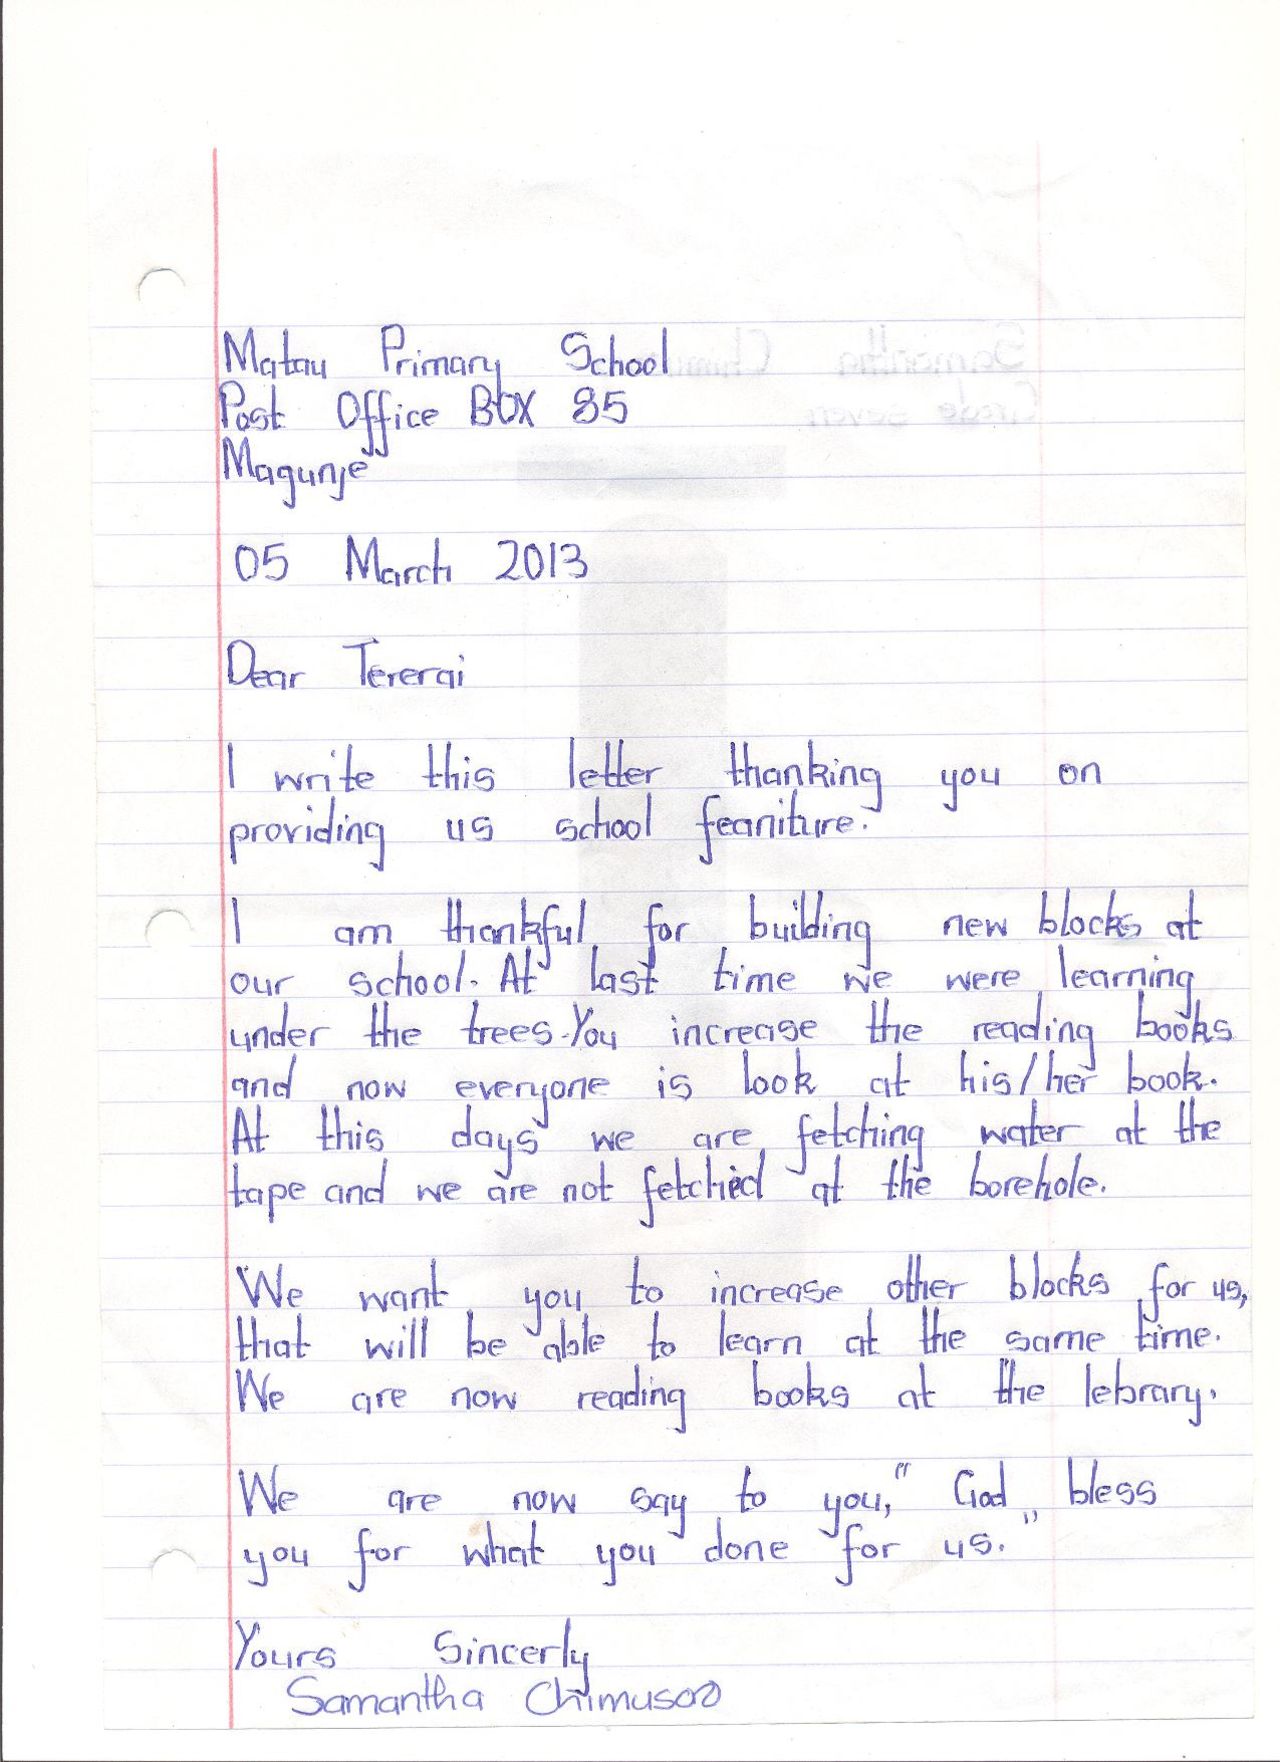 A thank-you letter written to Trent by a child from Matau.